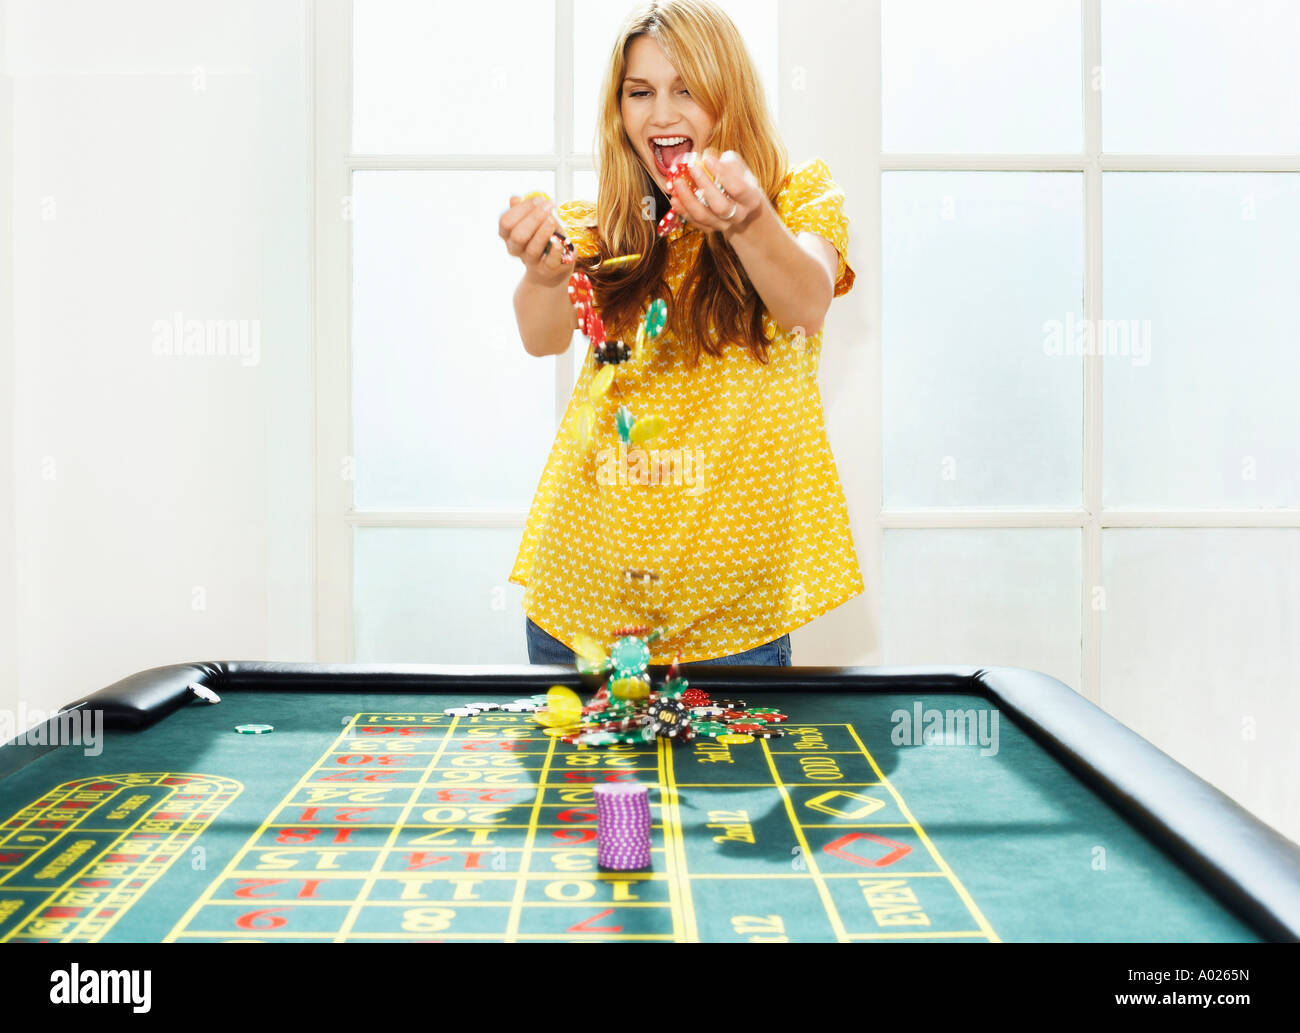 Young woman celebrating with chips on roulette table Stock Photo